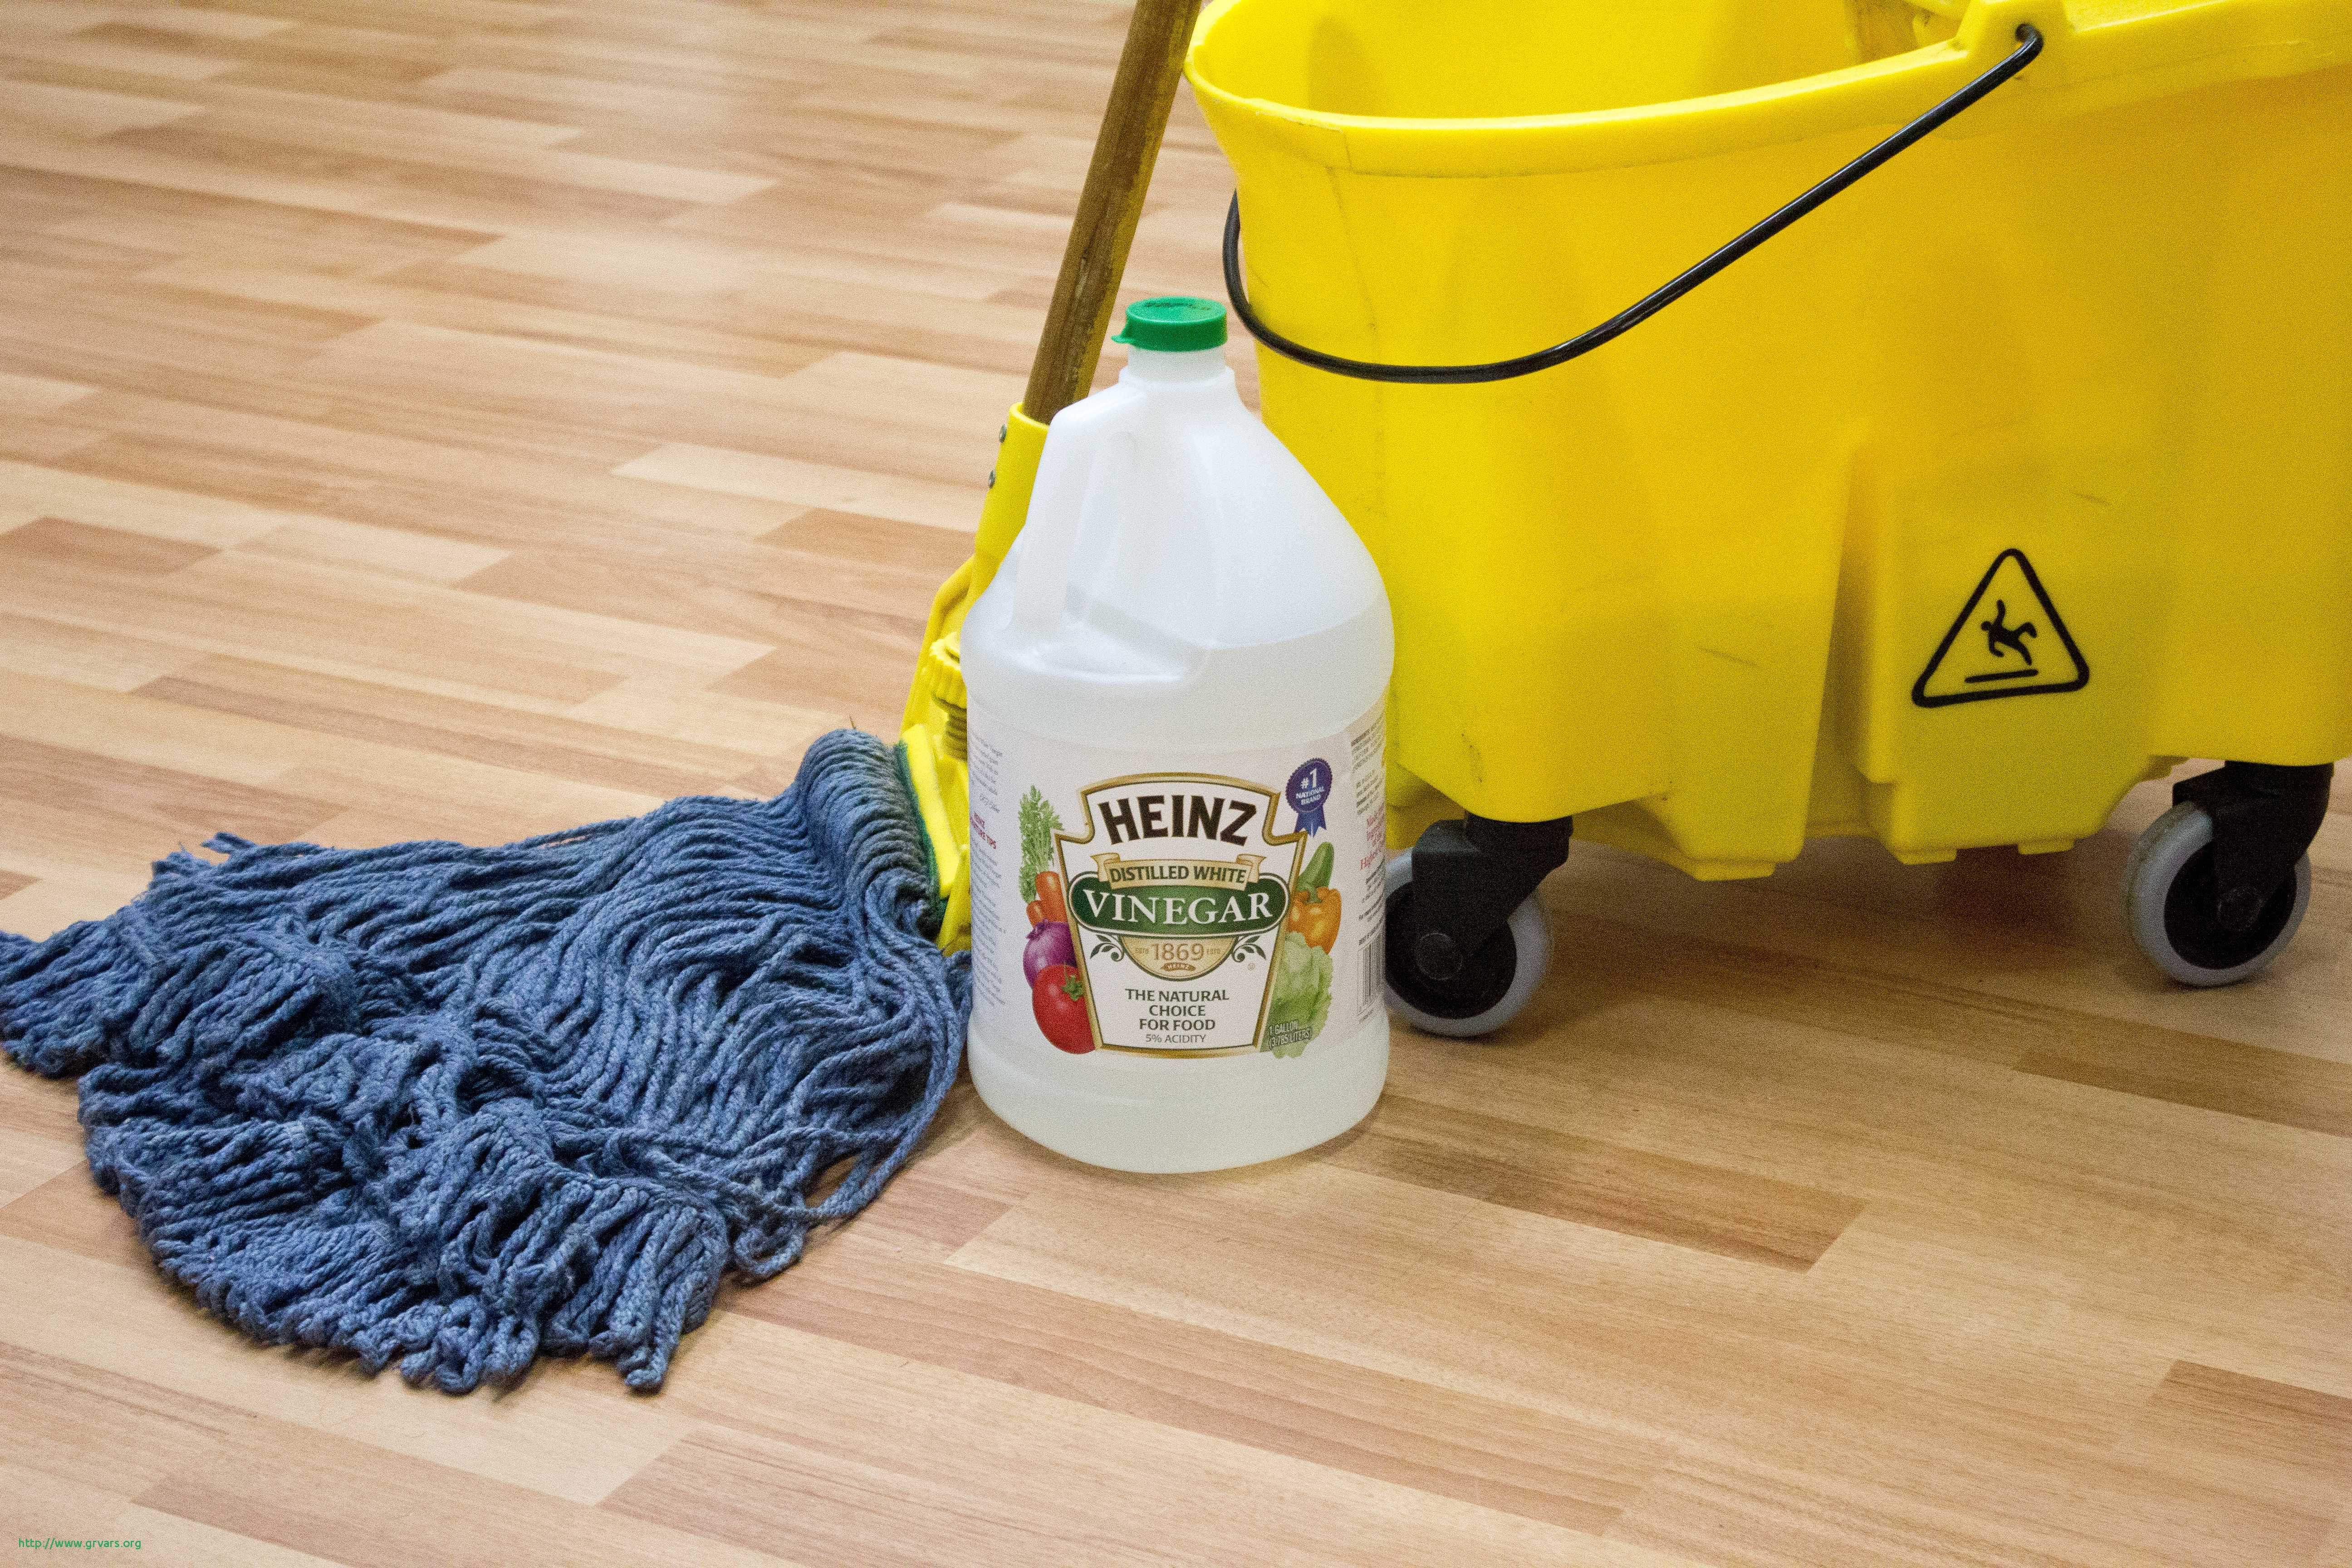 cleaning hardwood floors with vinegar and water ratio of 21 alagant how to clean bathroom floor with vinegar ideas blog inside cleaning bathroom tile floors vinegar fresh cleaning floors with white vinegar skill floor interior